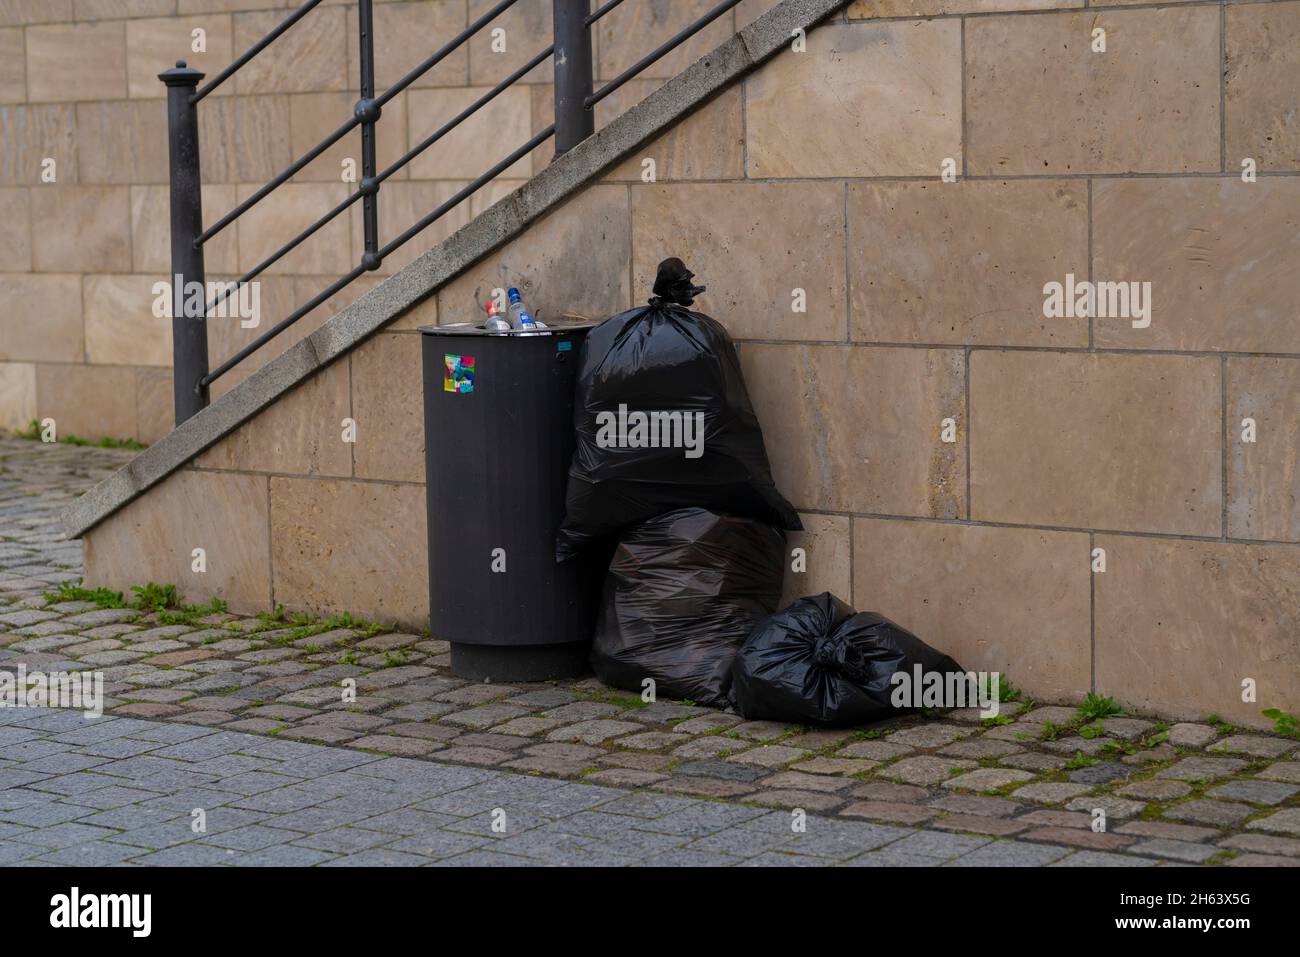 illegally disposed garbage bags next to a public trash can in berlin Stock Photo